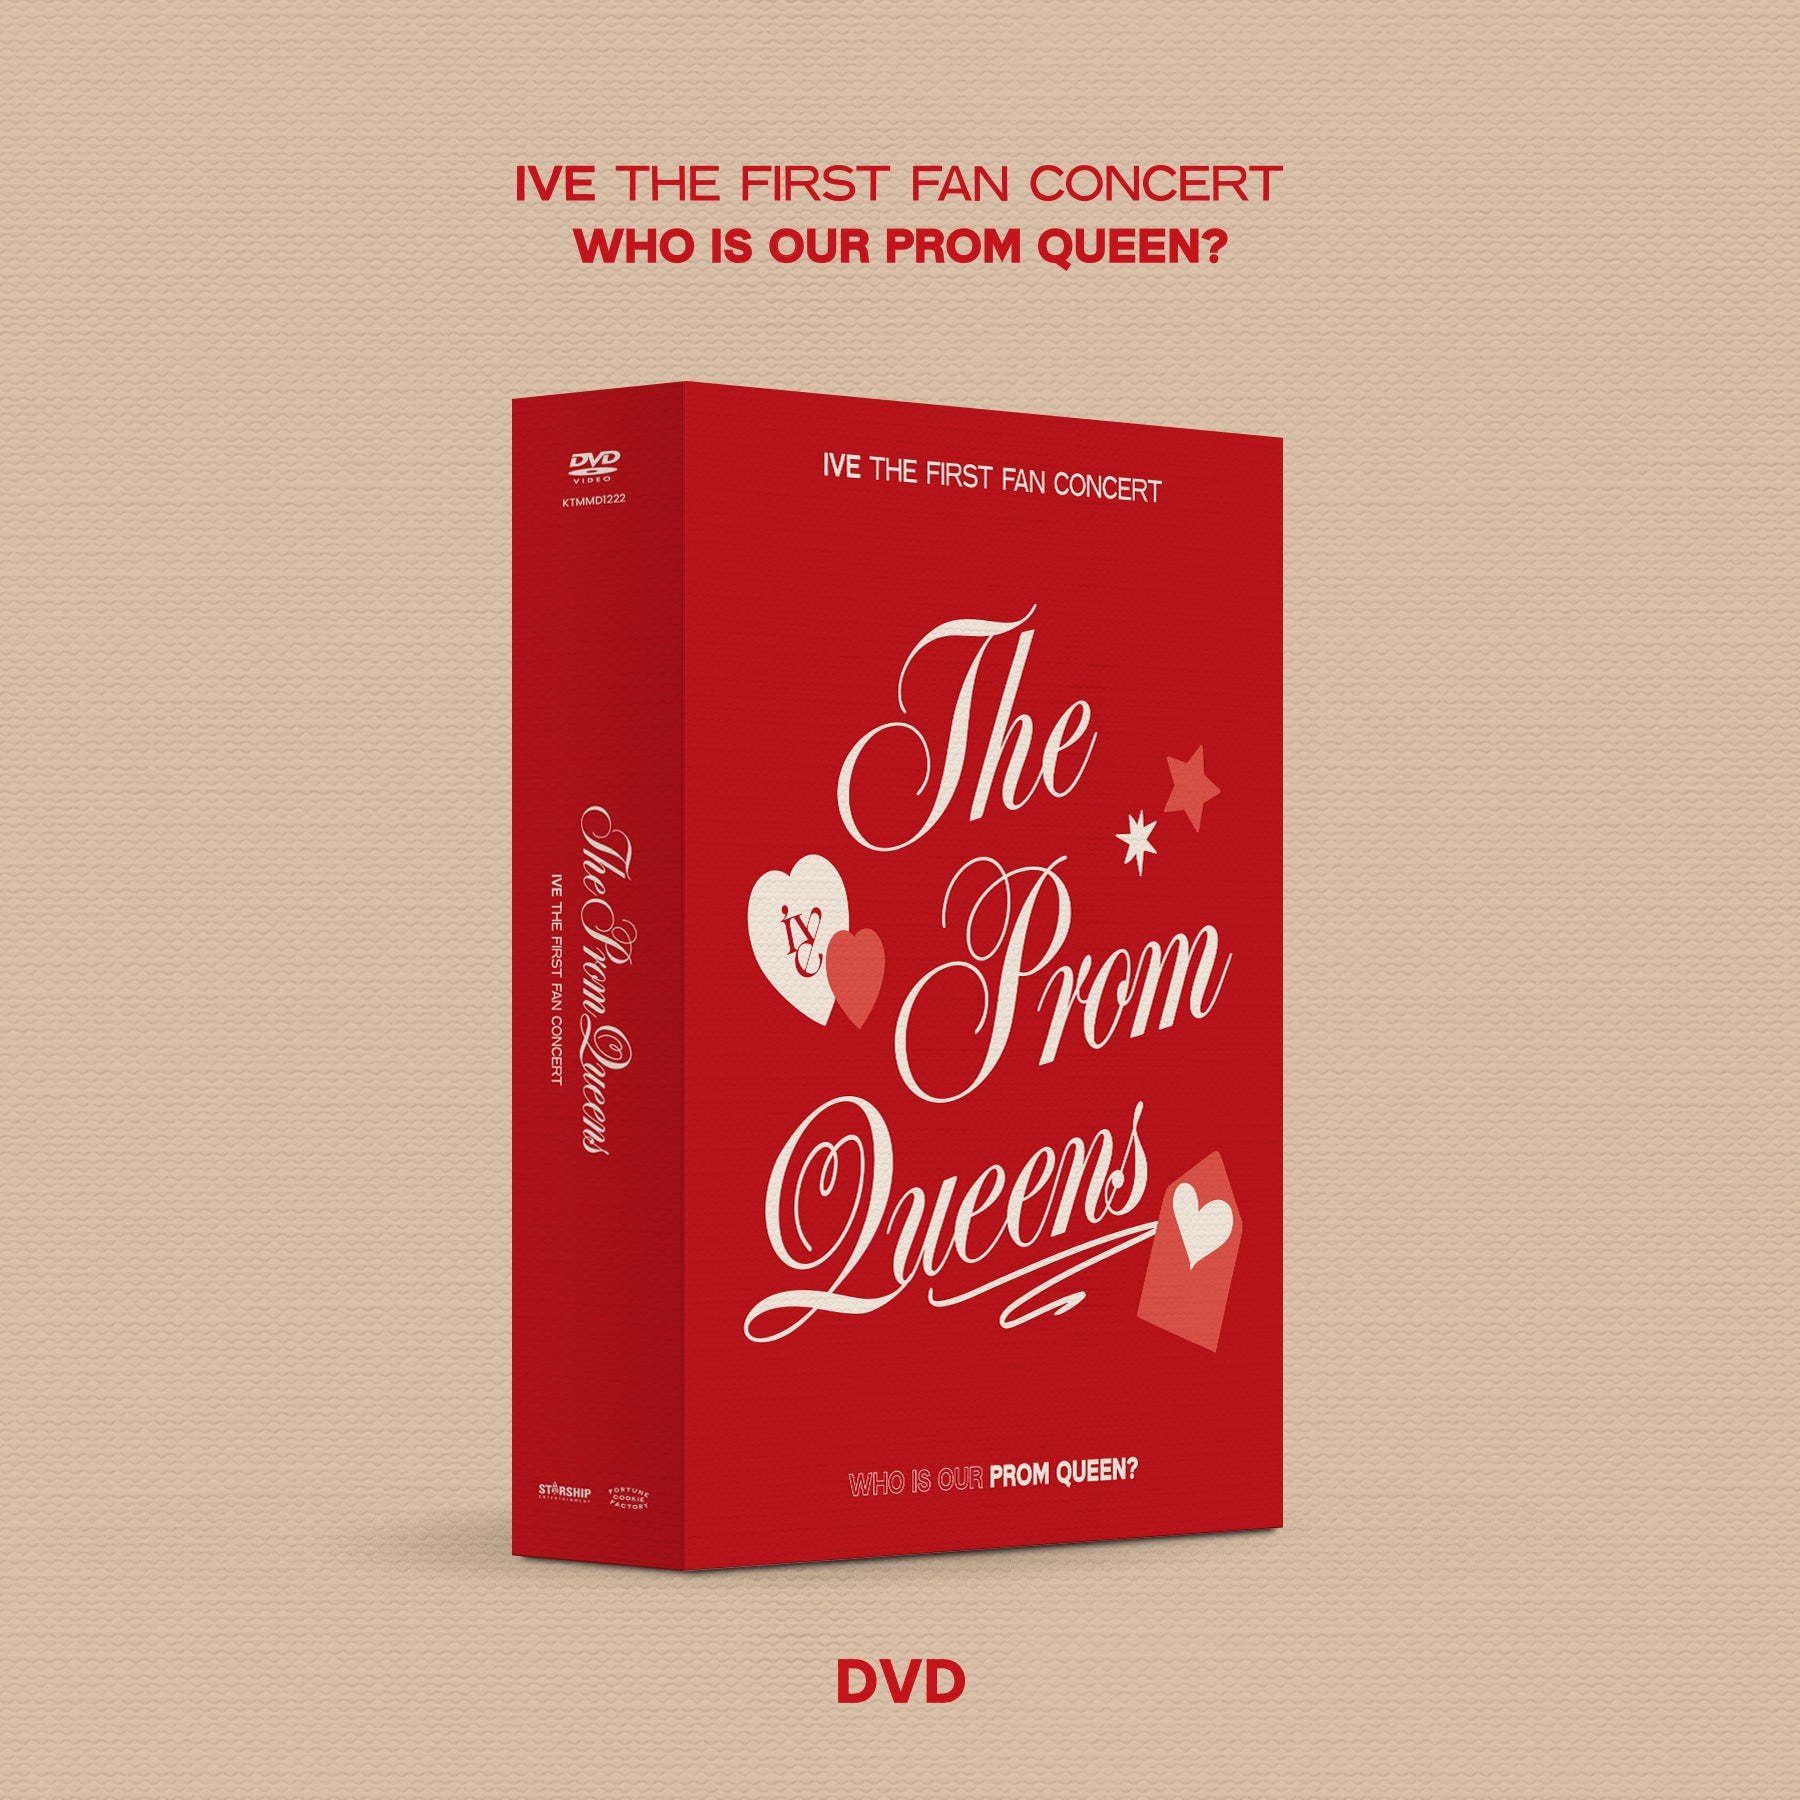 IVE THE FIRST FAN CONCERT 'THE PROM QUEENS' (DVD) COVER